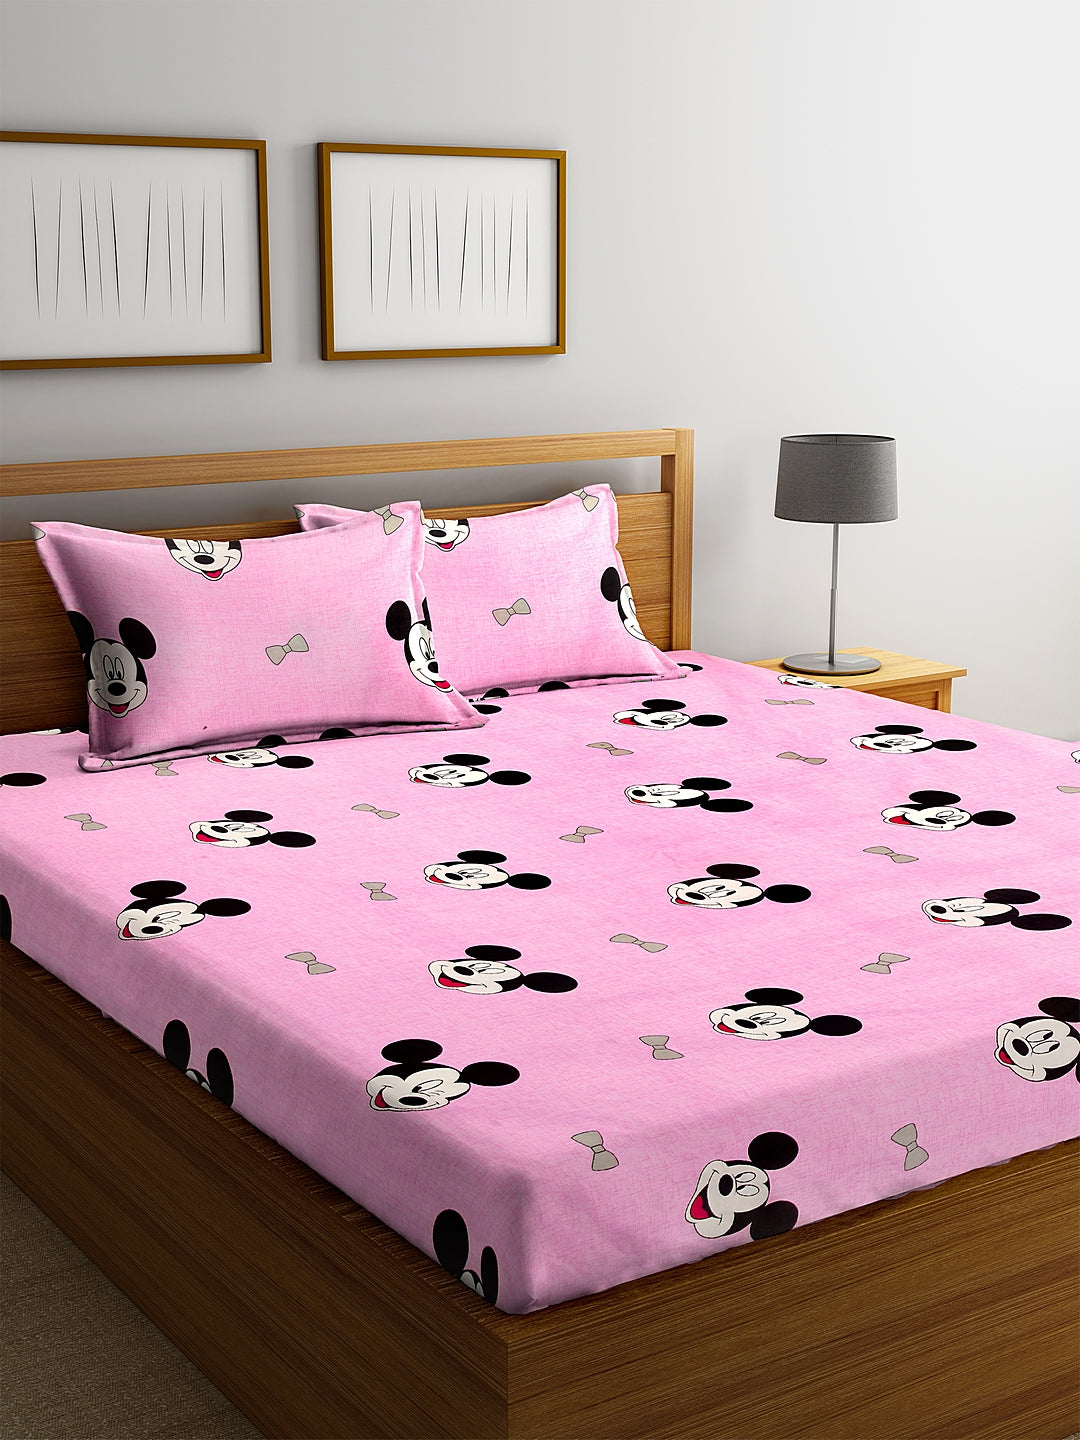 Klotthe Pink Cartoon Print 300 TC Cotton Blend Double Bed Sheet with 2 Pillow Covers in Book Fold Packing